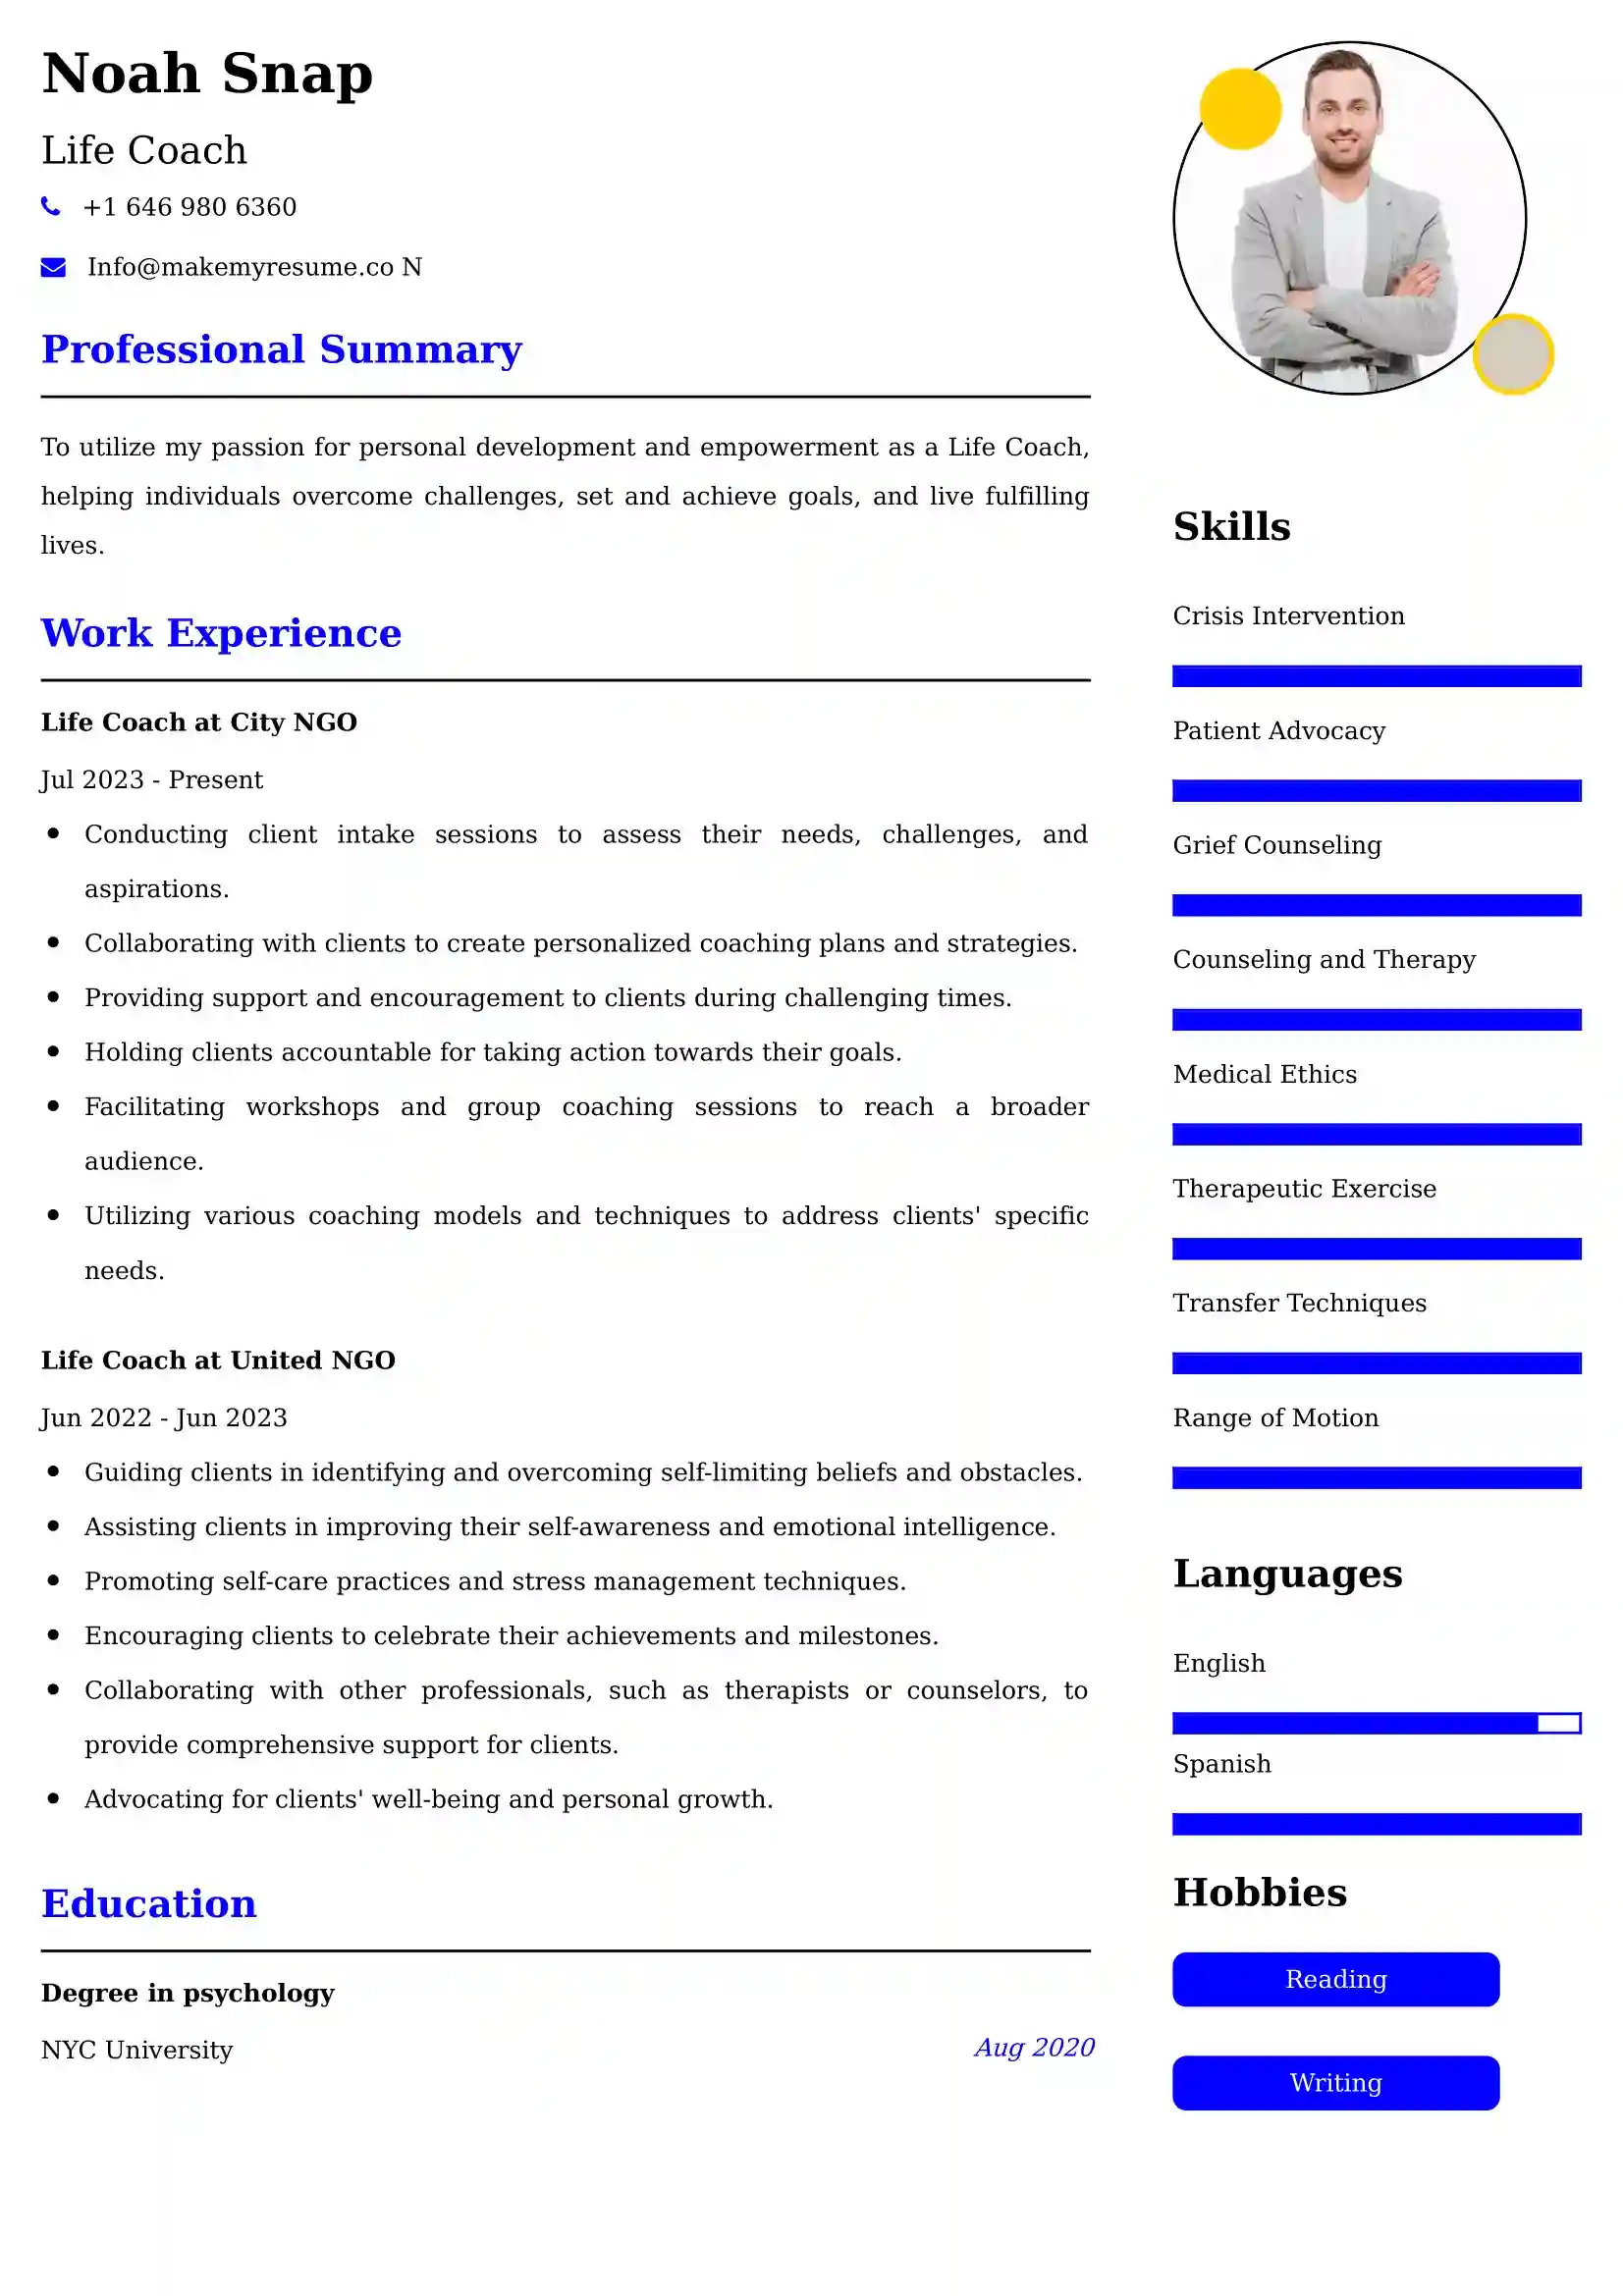 Life Coach Resume Examples for UAE